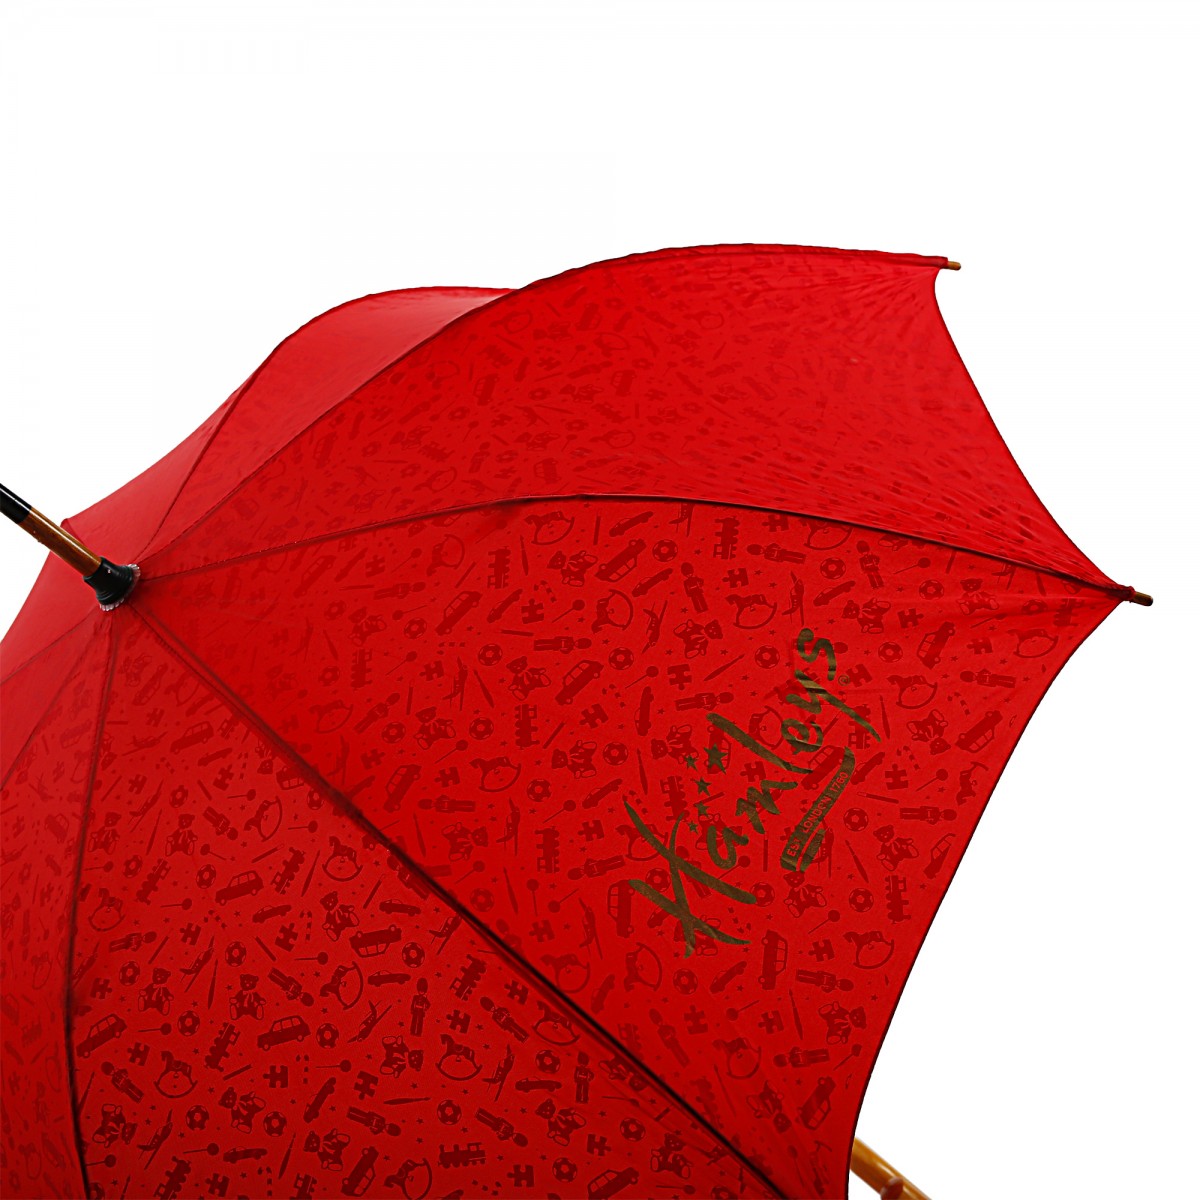 Hamleys London Print 28 inches Single Fold Rain Umbrella with Wooden Bend Handle and Auto Open Long Umbrellas, Kids for 5Y+, Red